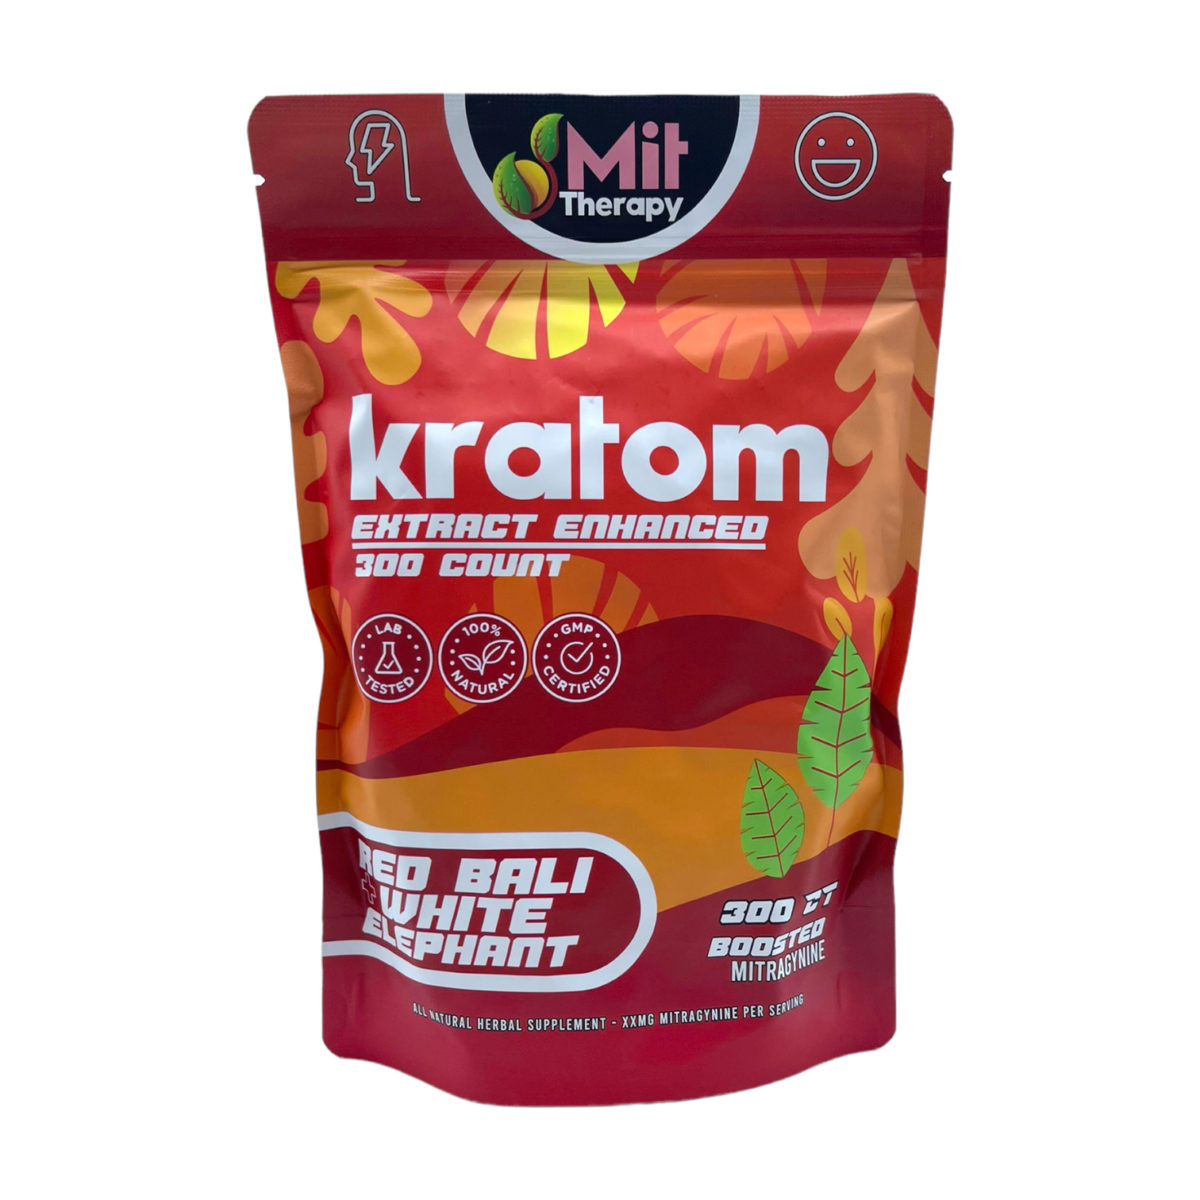 MIT Therapy Red Bali White Elephant Extract Enhanced Kratom Capsules